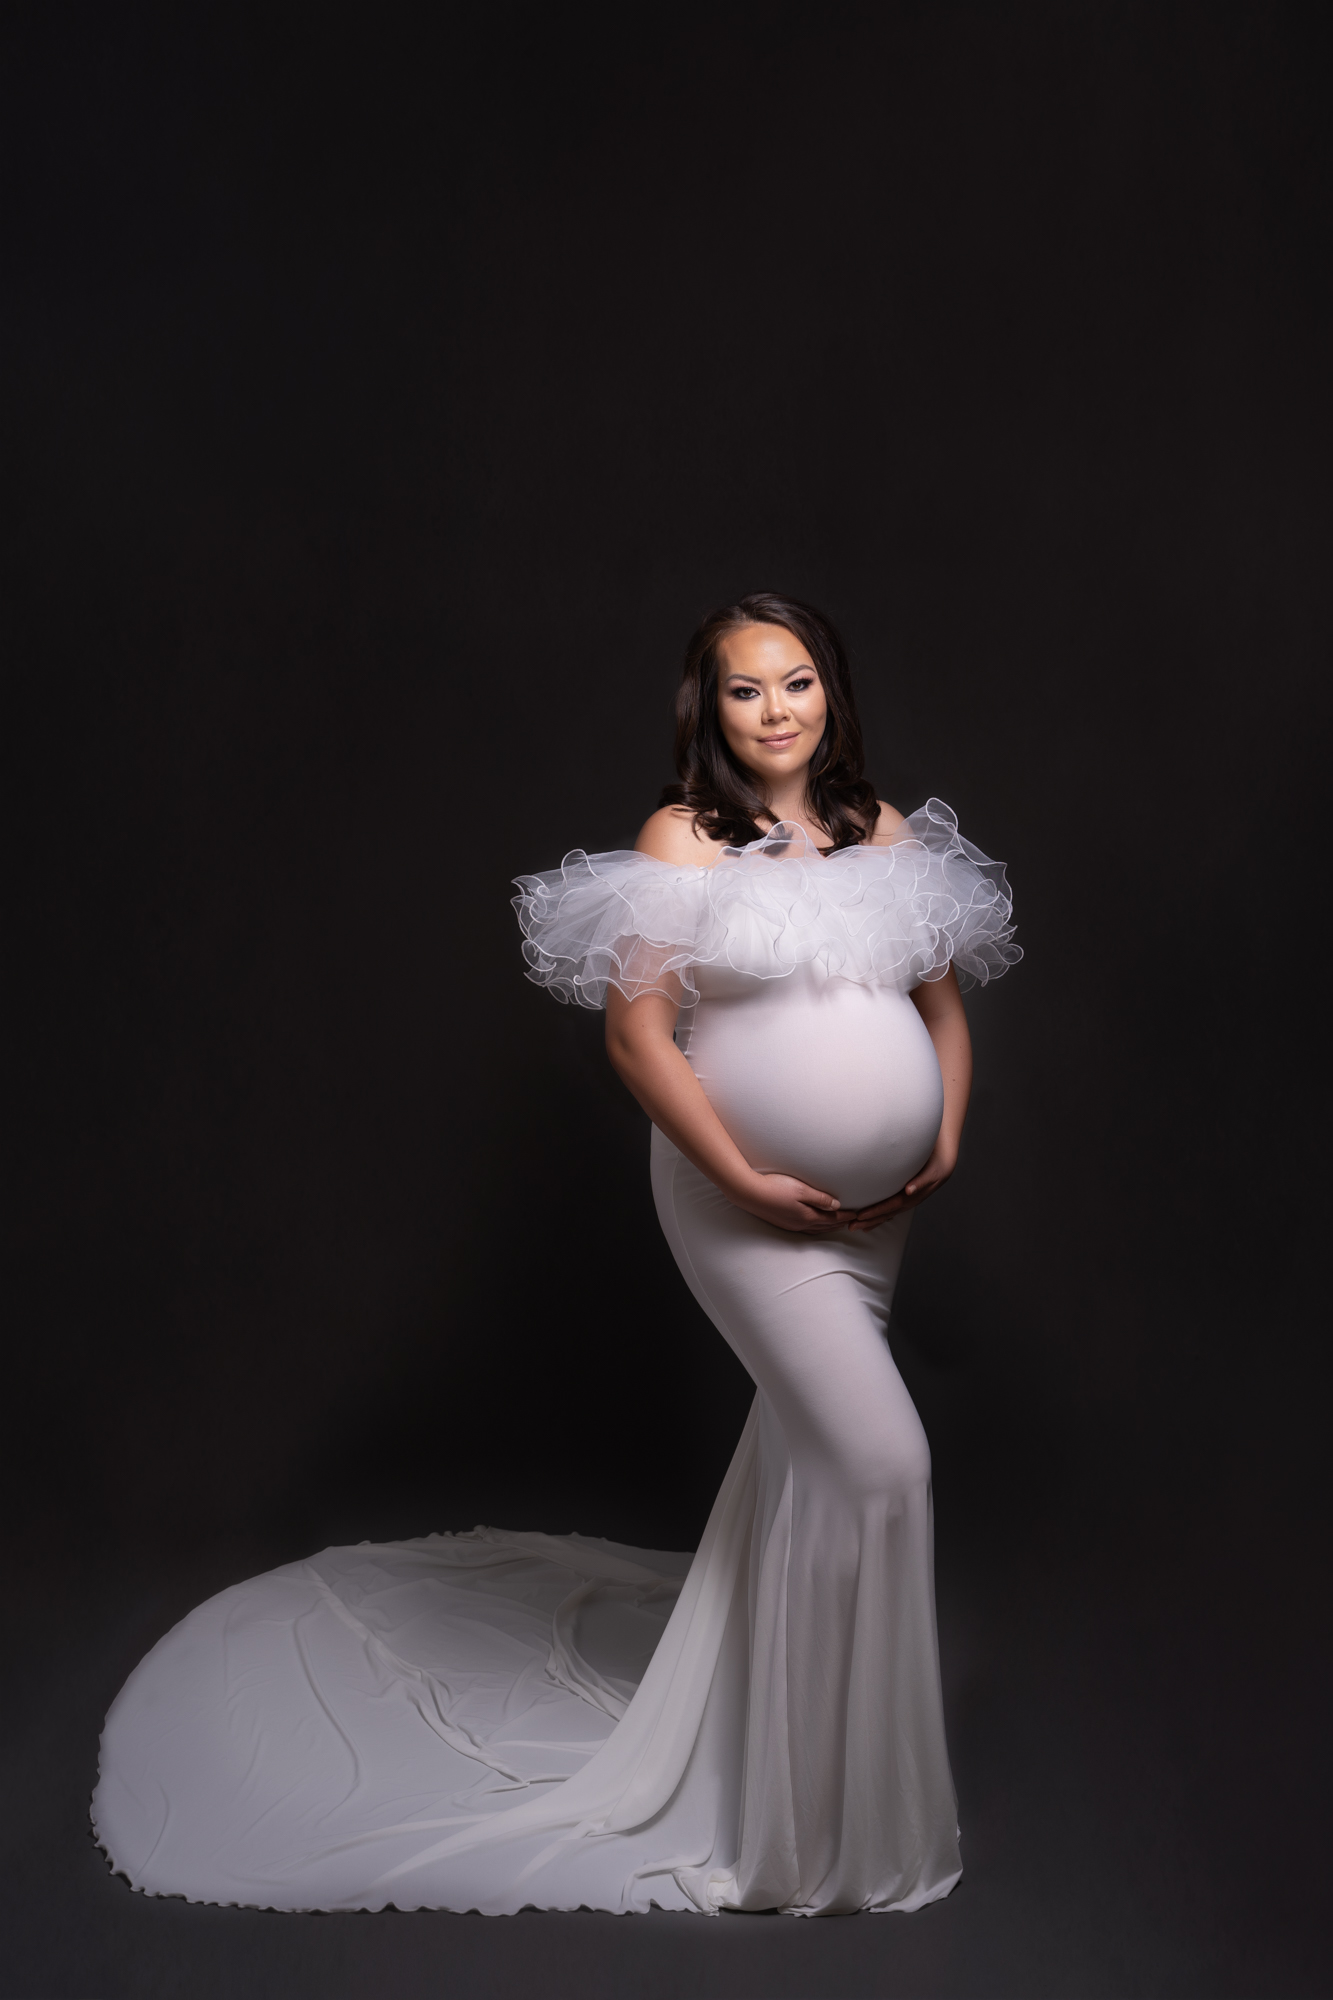 maternity portrait of pregnant woman in white maternity dress on black backdrop